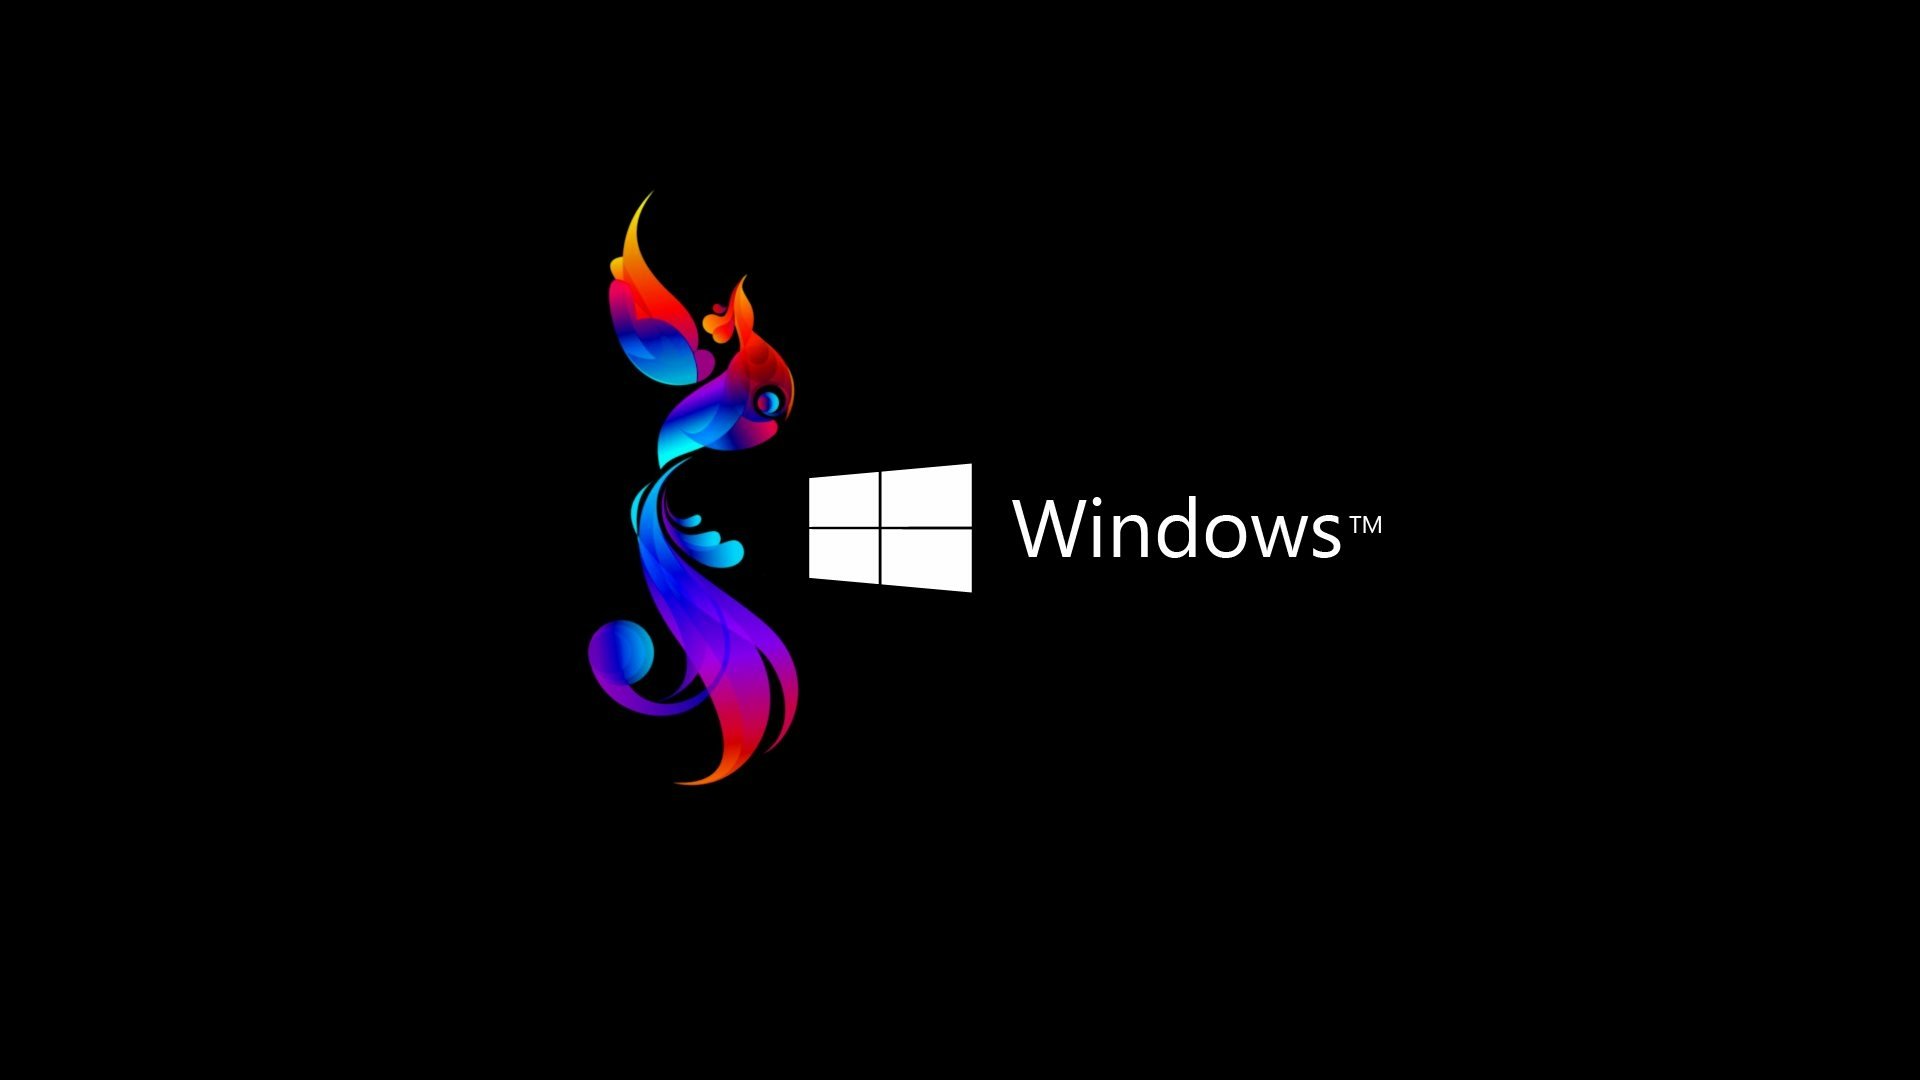 windows 8 Full HD Papel de Parede and Background Image | 1920x1080 | ID ... Full Hd Wallpapers For Windows 8 1920x1080